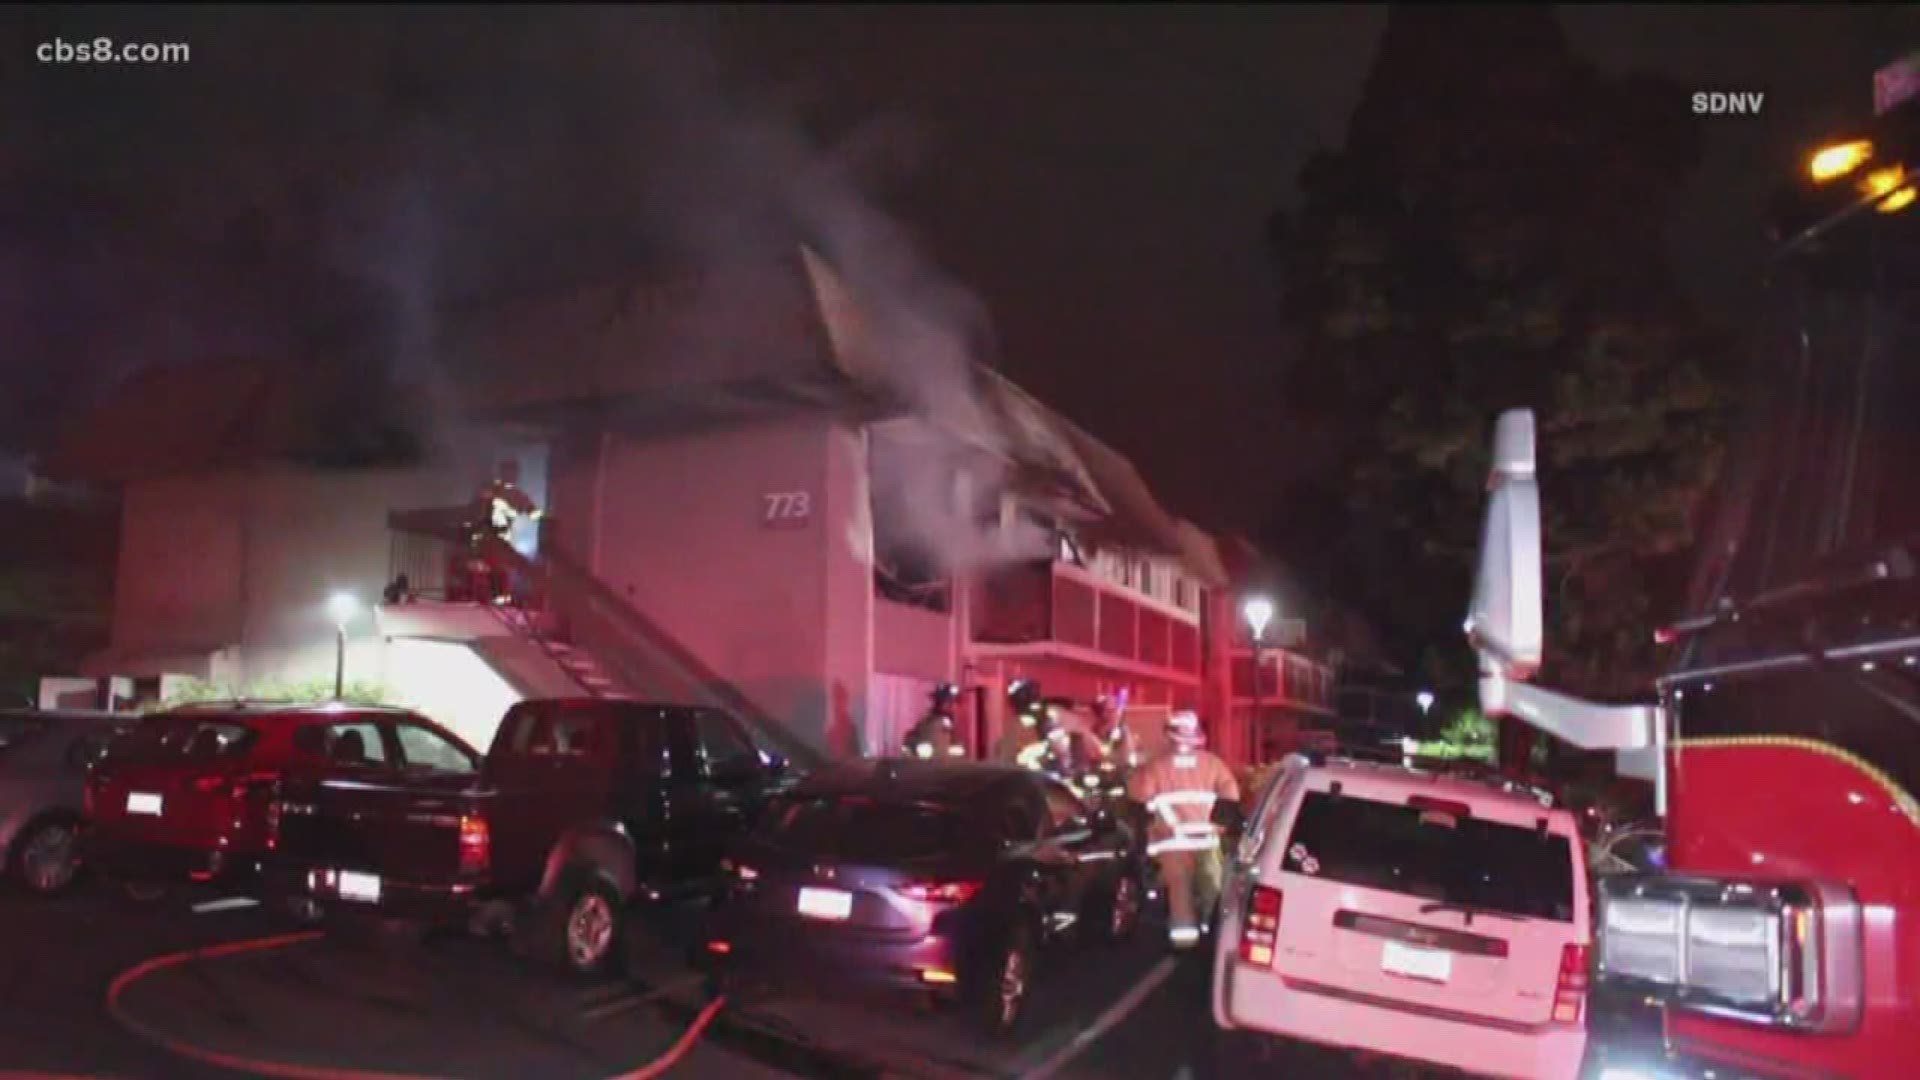 Authorities say 10 units were evacuated and the fire destroyed at least one second story unit.